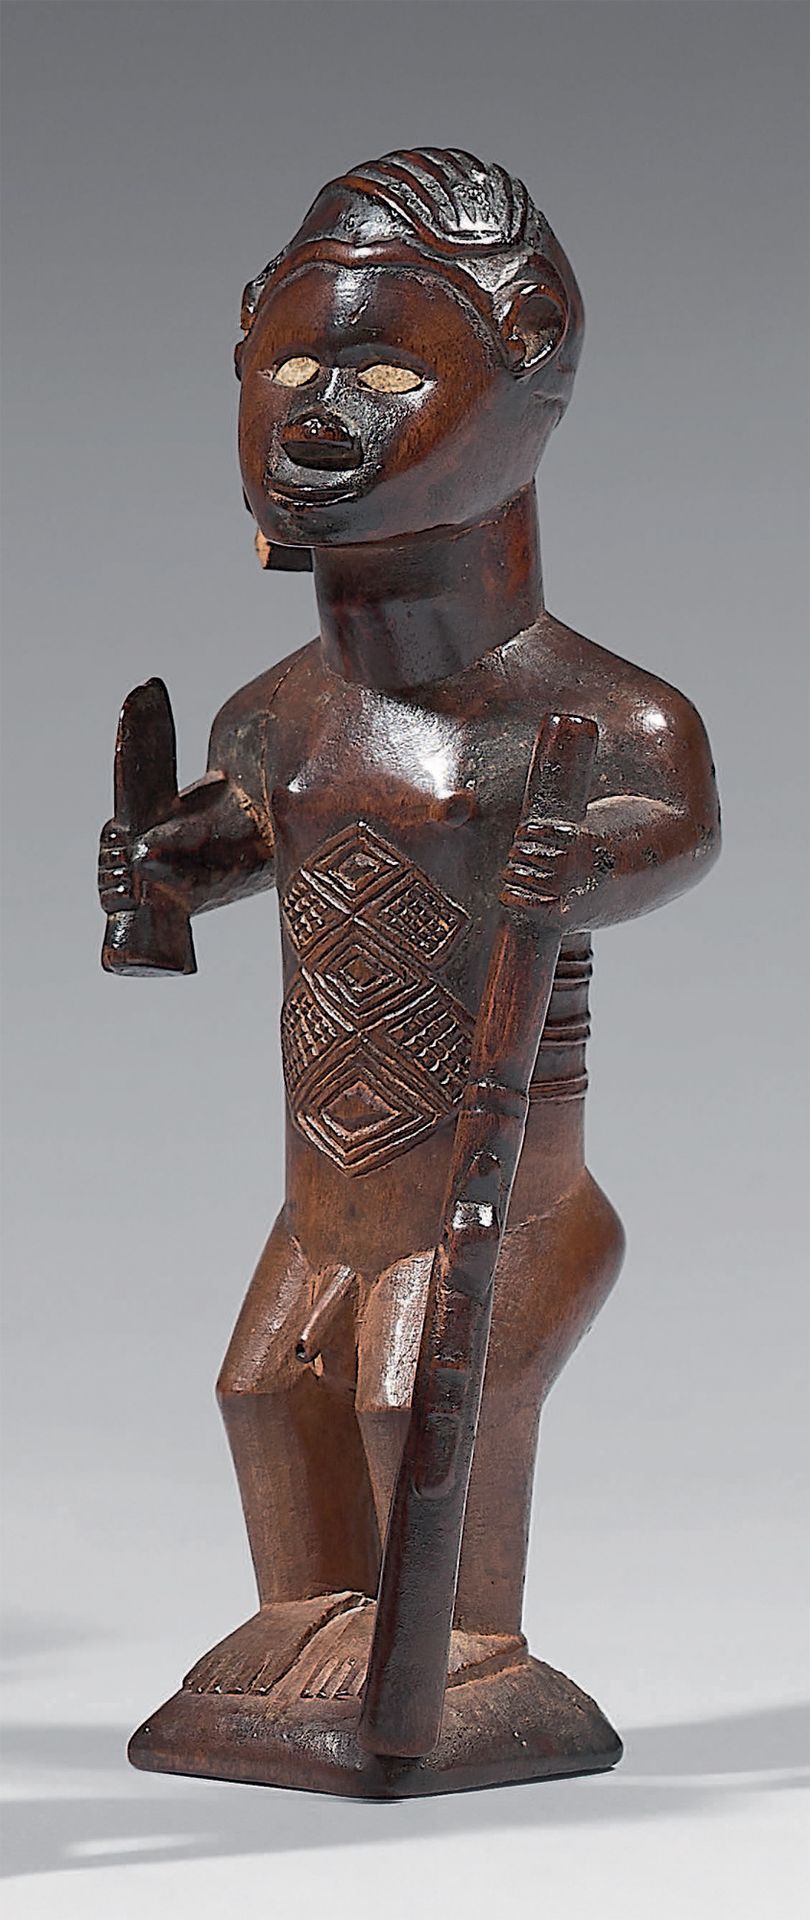 Null Bembe statuette (Congo)
The standing male figure with a scarified abdomen a&hellip;